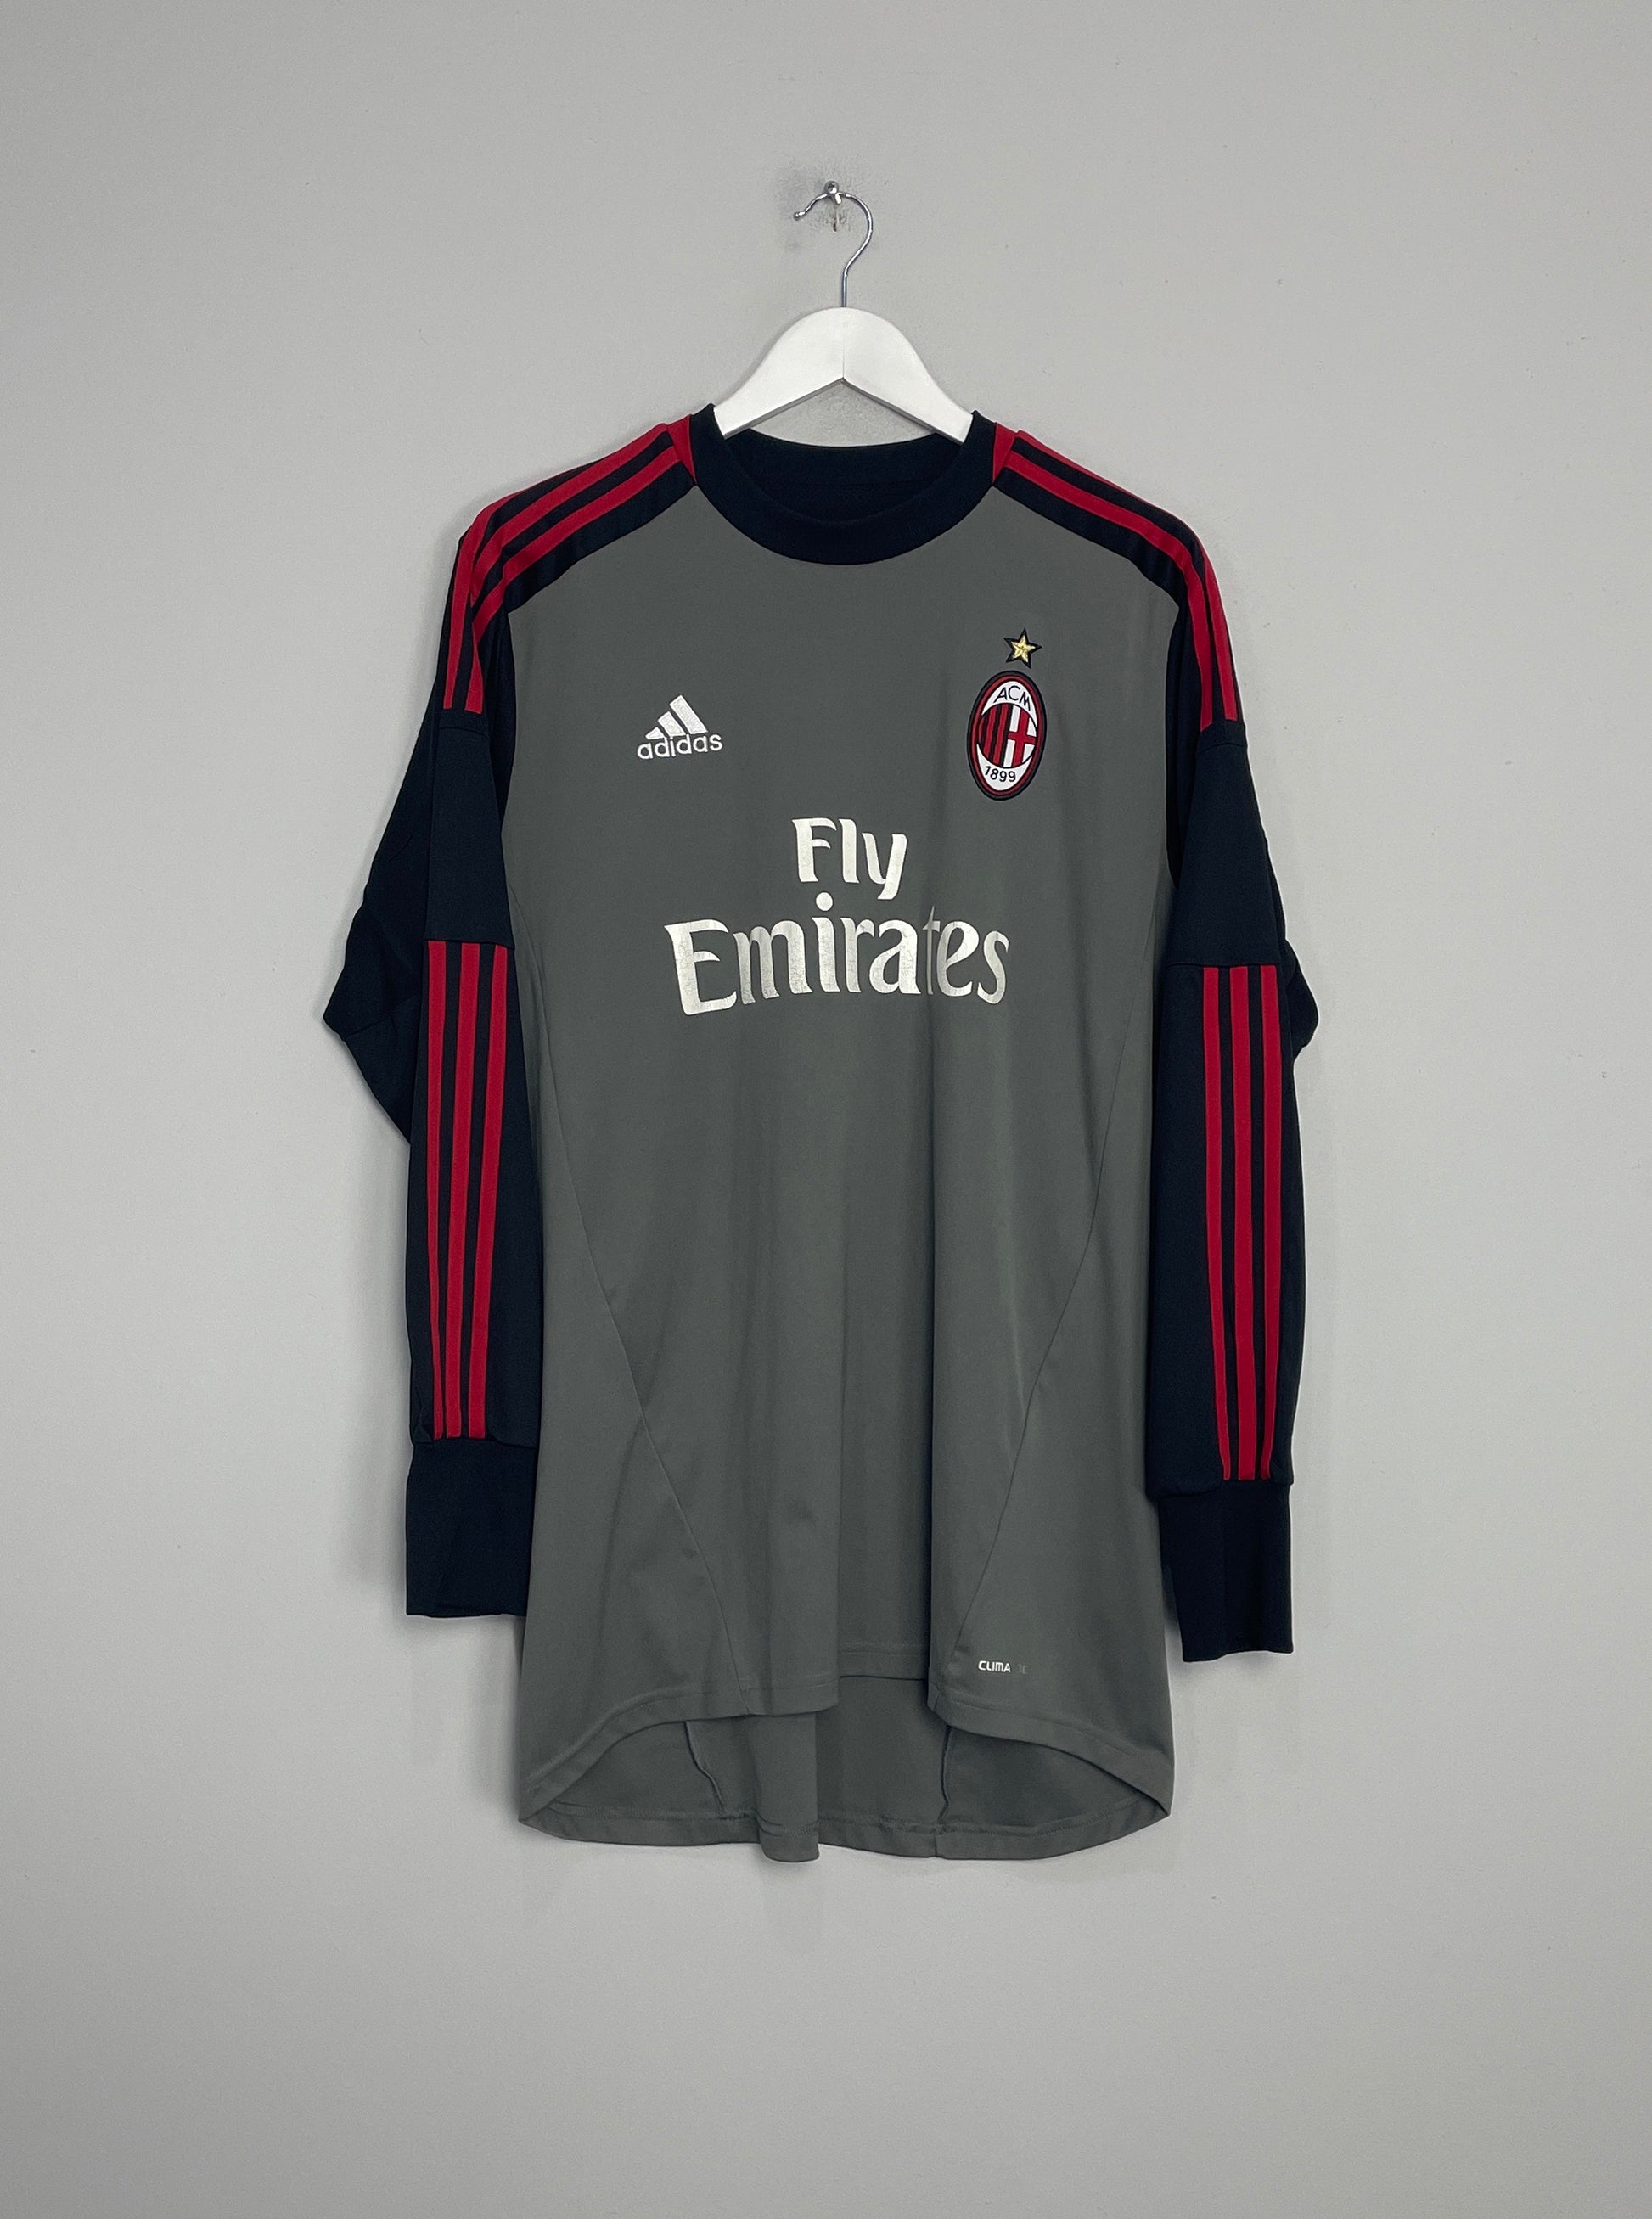 Image of the AC Milan shirt from the 2012/13 season